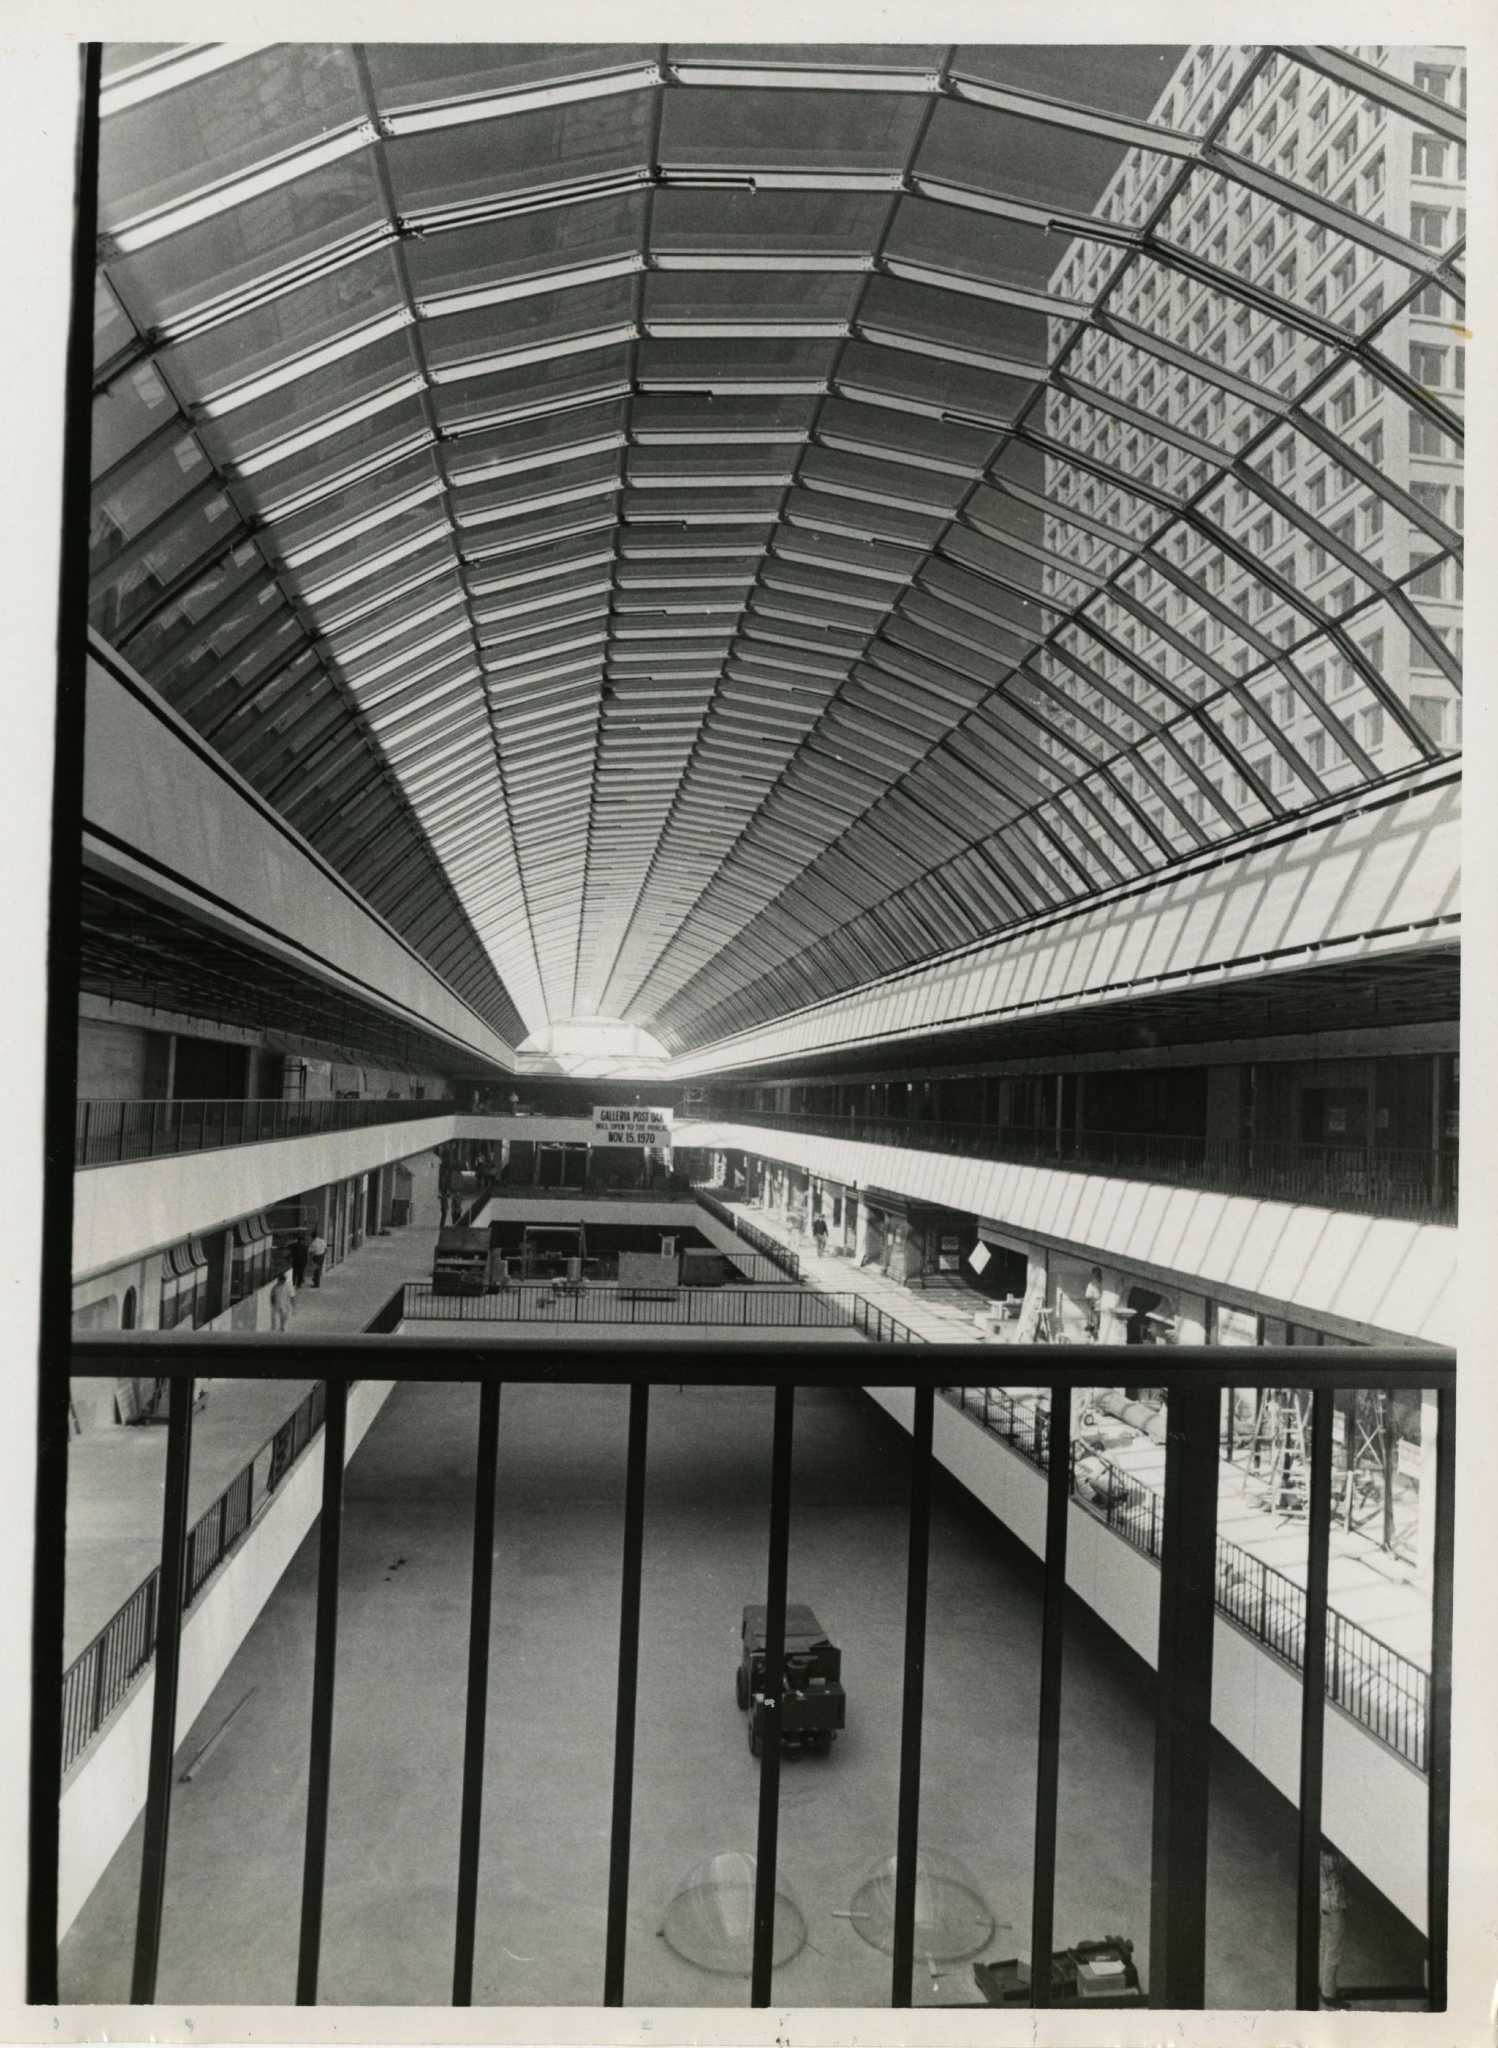 A look back: Galleria's opening caught world's eye